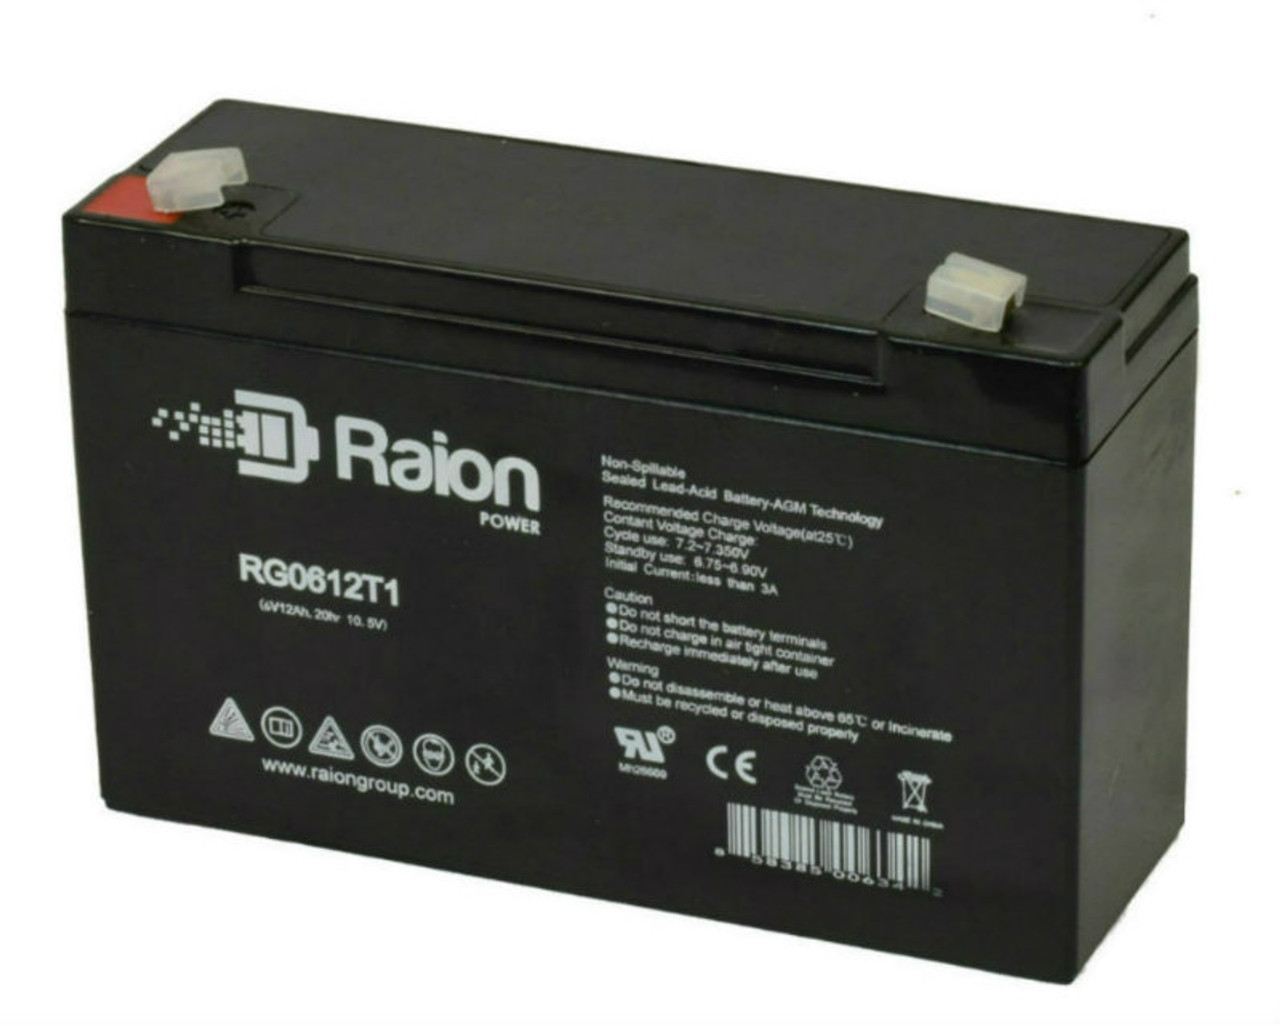 Raion Power RG06120T1 Replacement Emergency Light Battery for Light Alarms P12G1